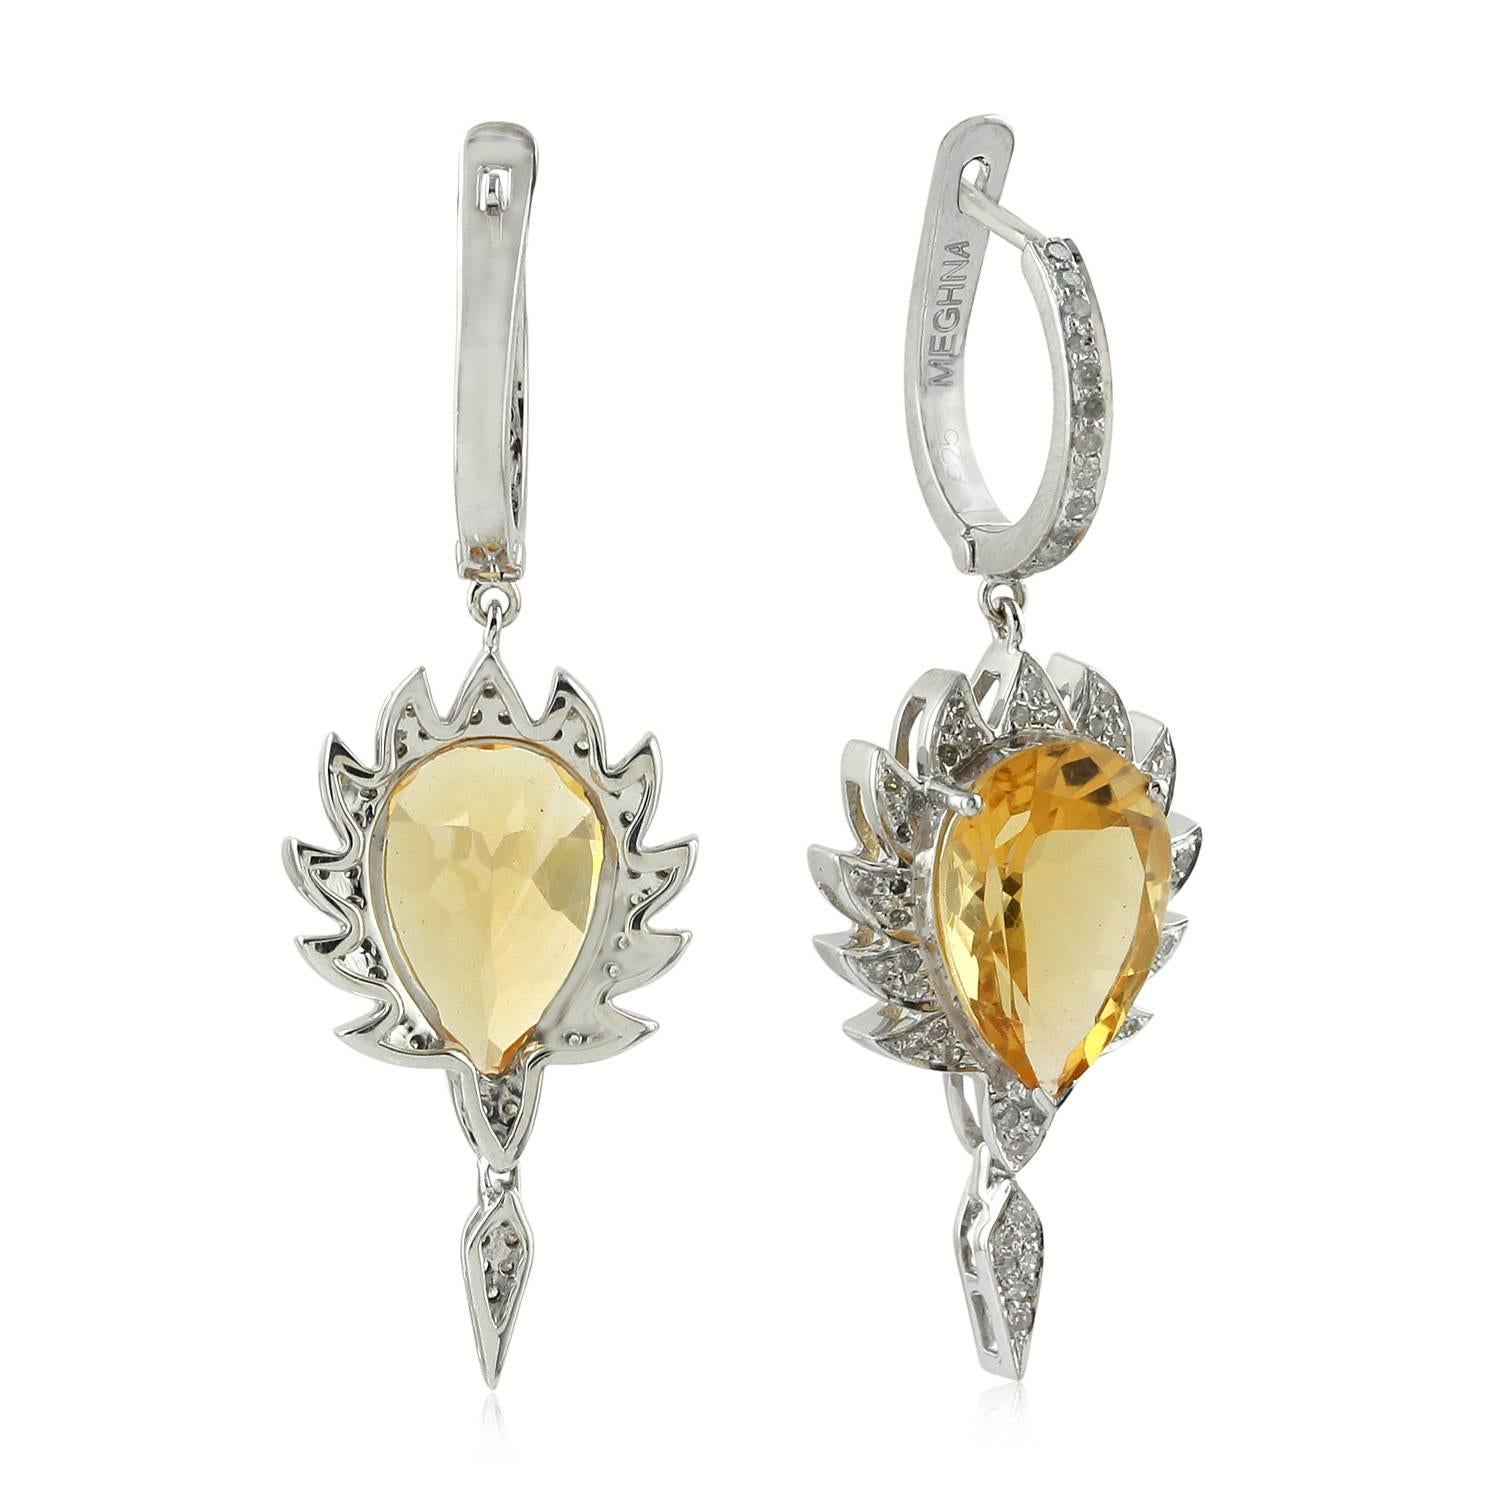 These claw drop earrings are cast in 18K gold and sterling silver. It is hand set in 9.15 carat citrine and .55 carat of sparkling diamonds. Framed in signature 